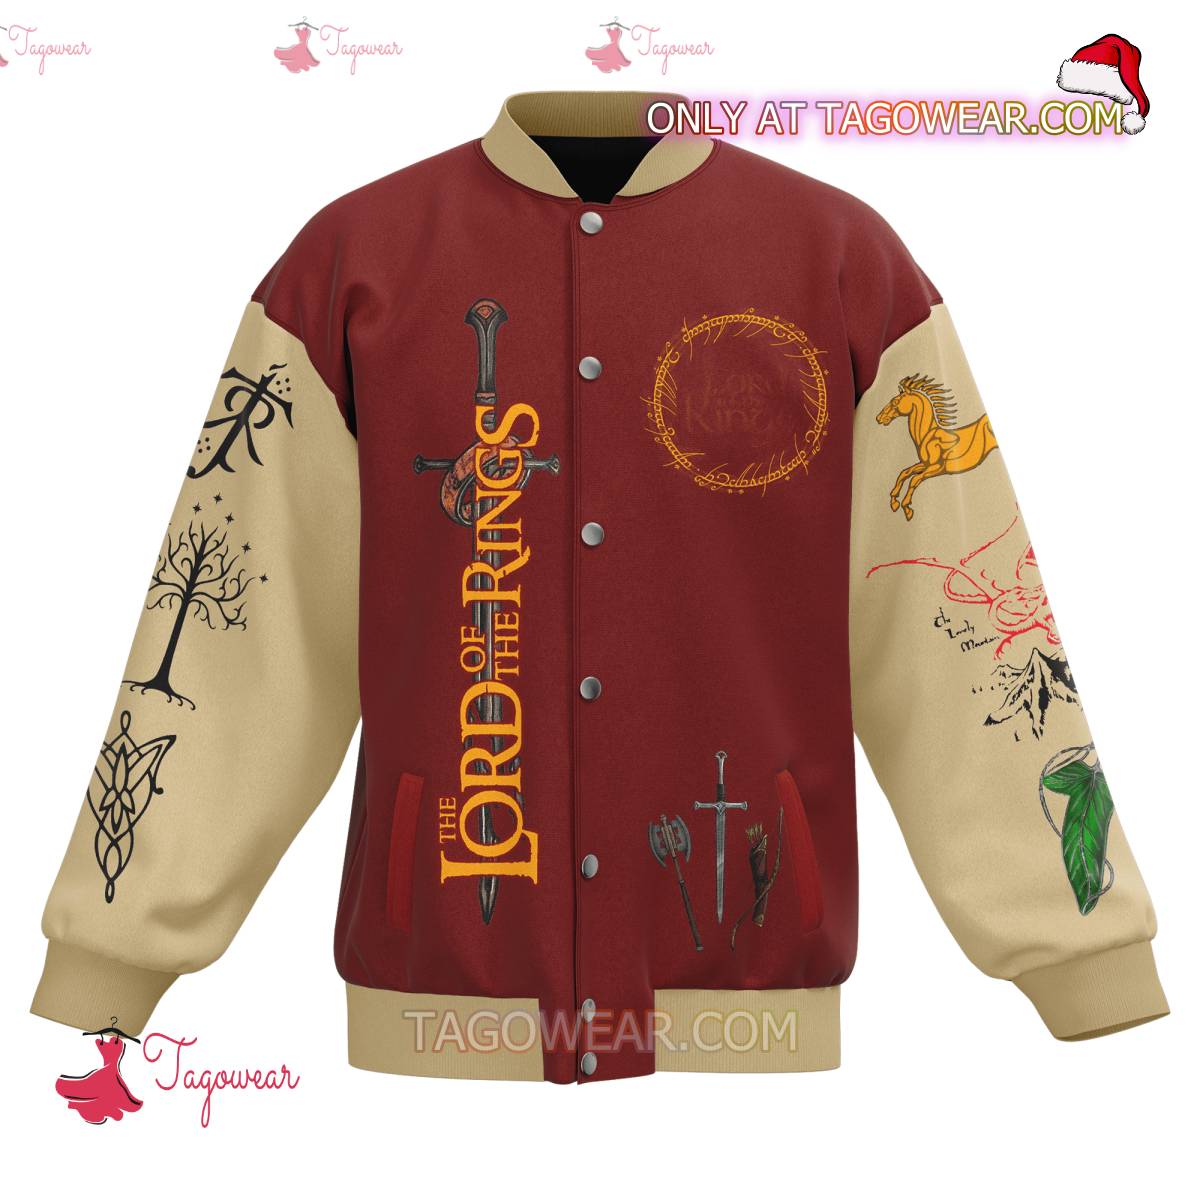 The Lord Of The Rings Baseball Jacket b